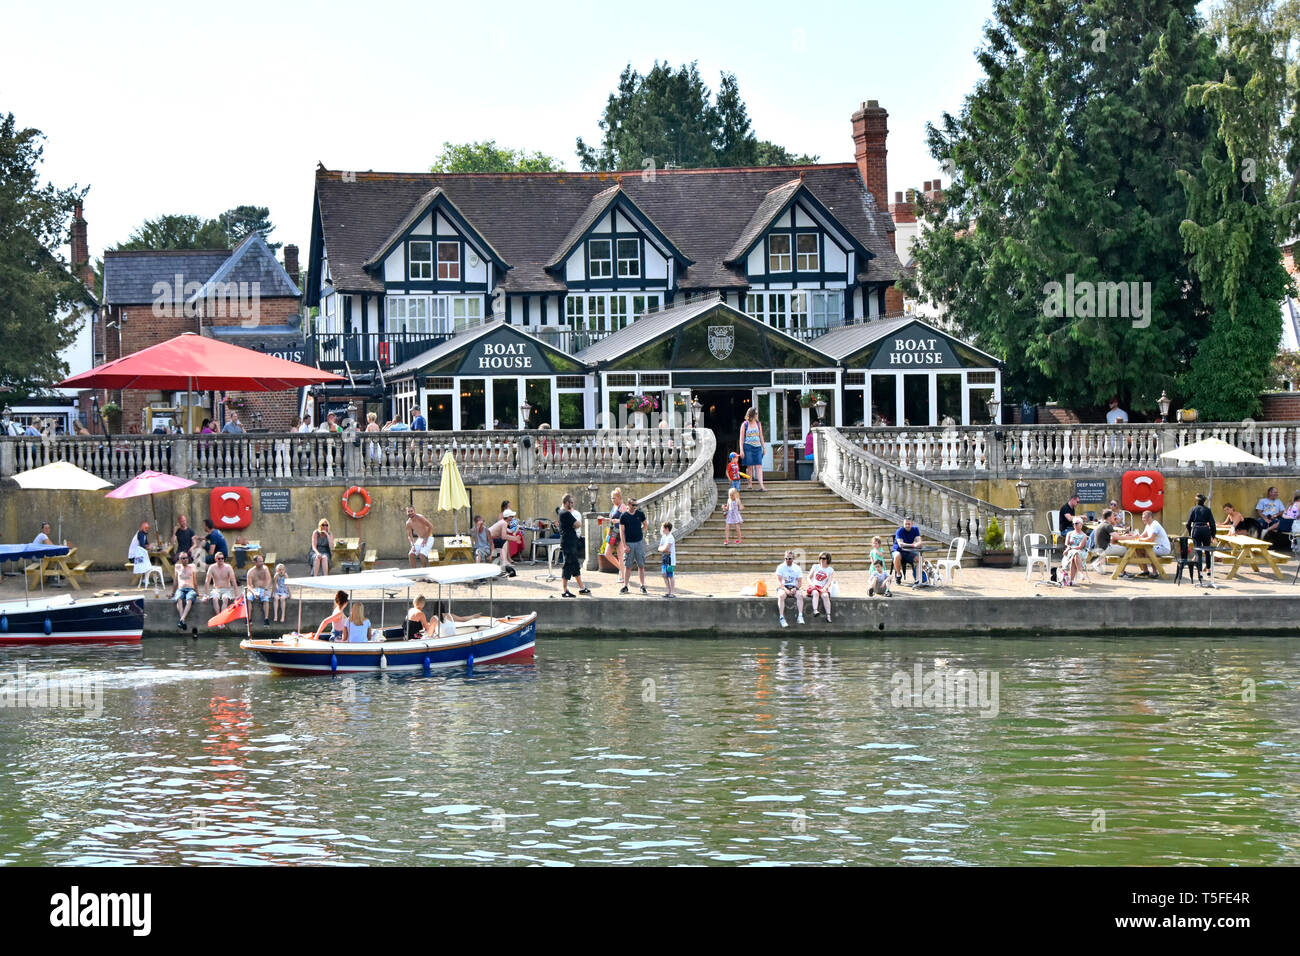 People enjoying refreshments & boat hire on hot summer day at riverside Boat House pub business on River Thames Wallingford Oxfordshire England UK Stock Photo